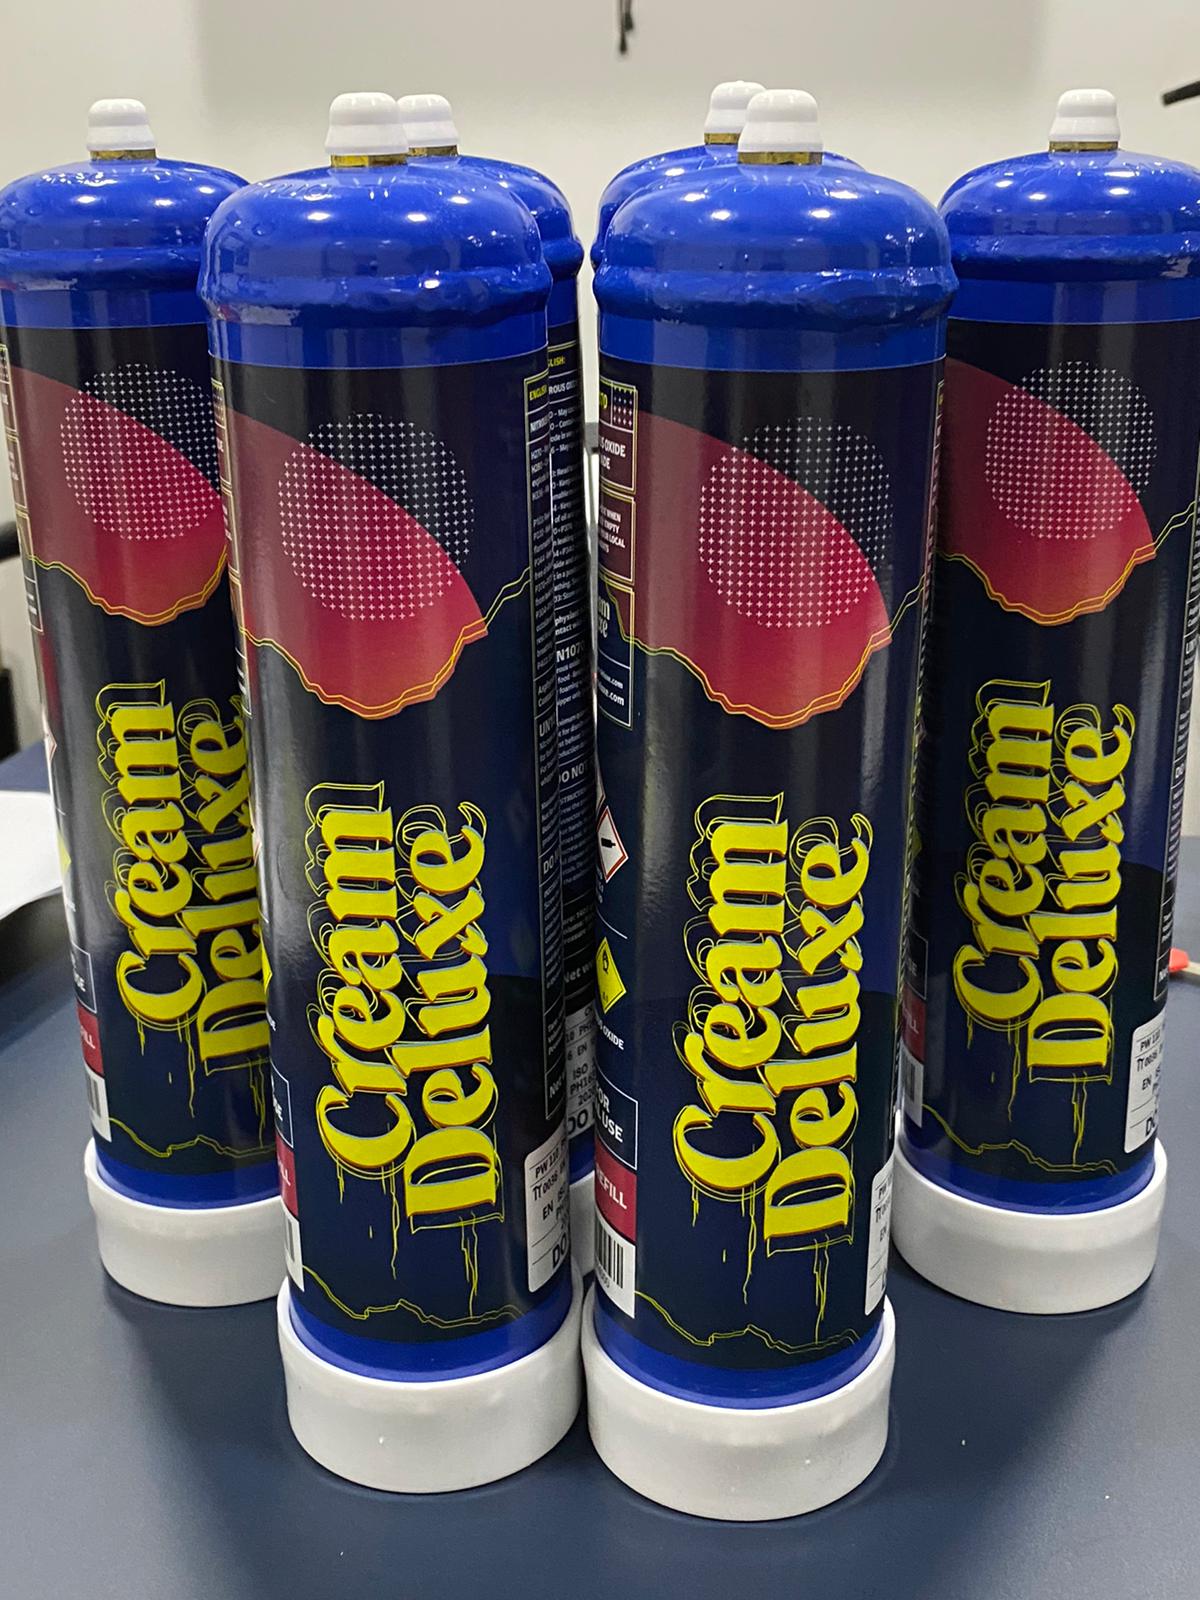 Cream Deluxe Cream Charger 615g for Sale